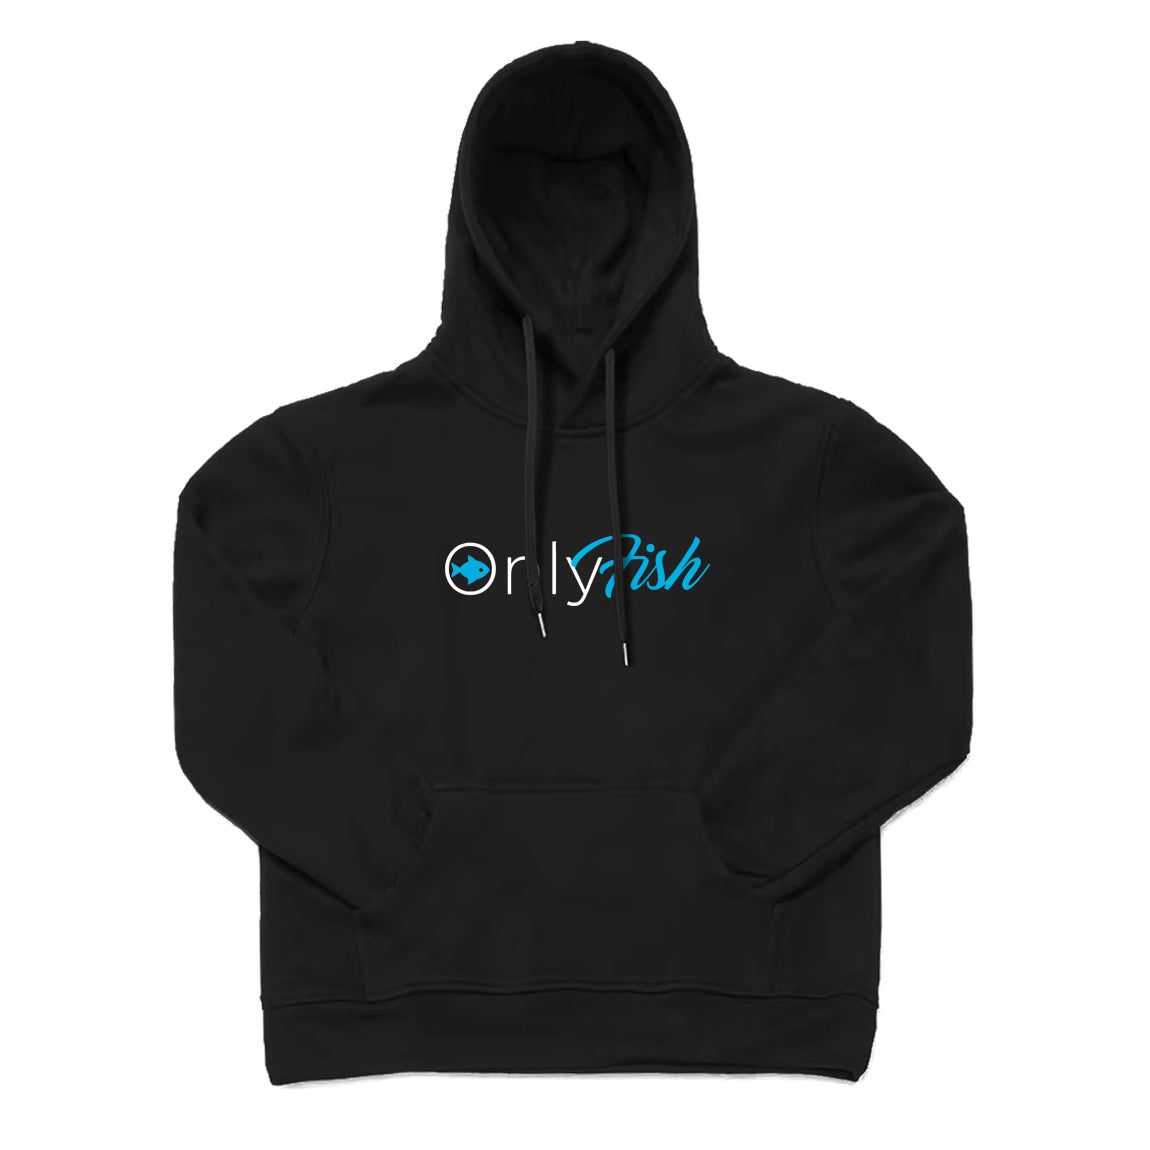 ONLY FISH Hoodie